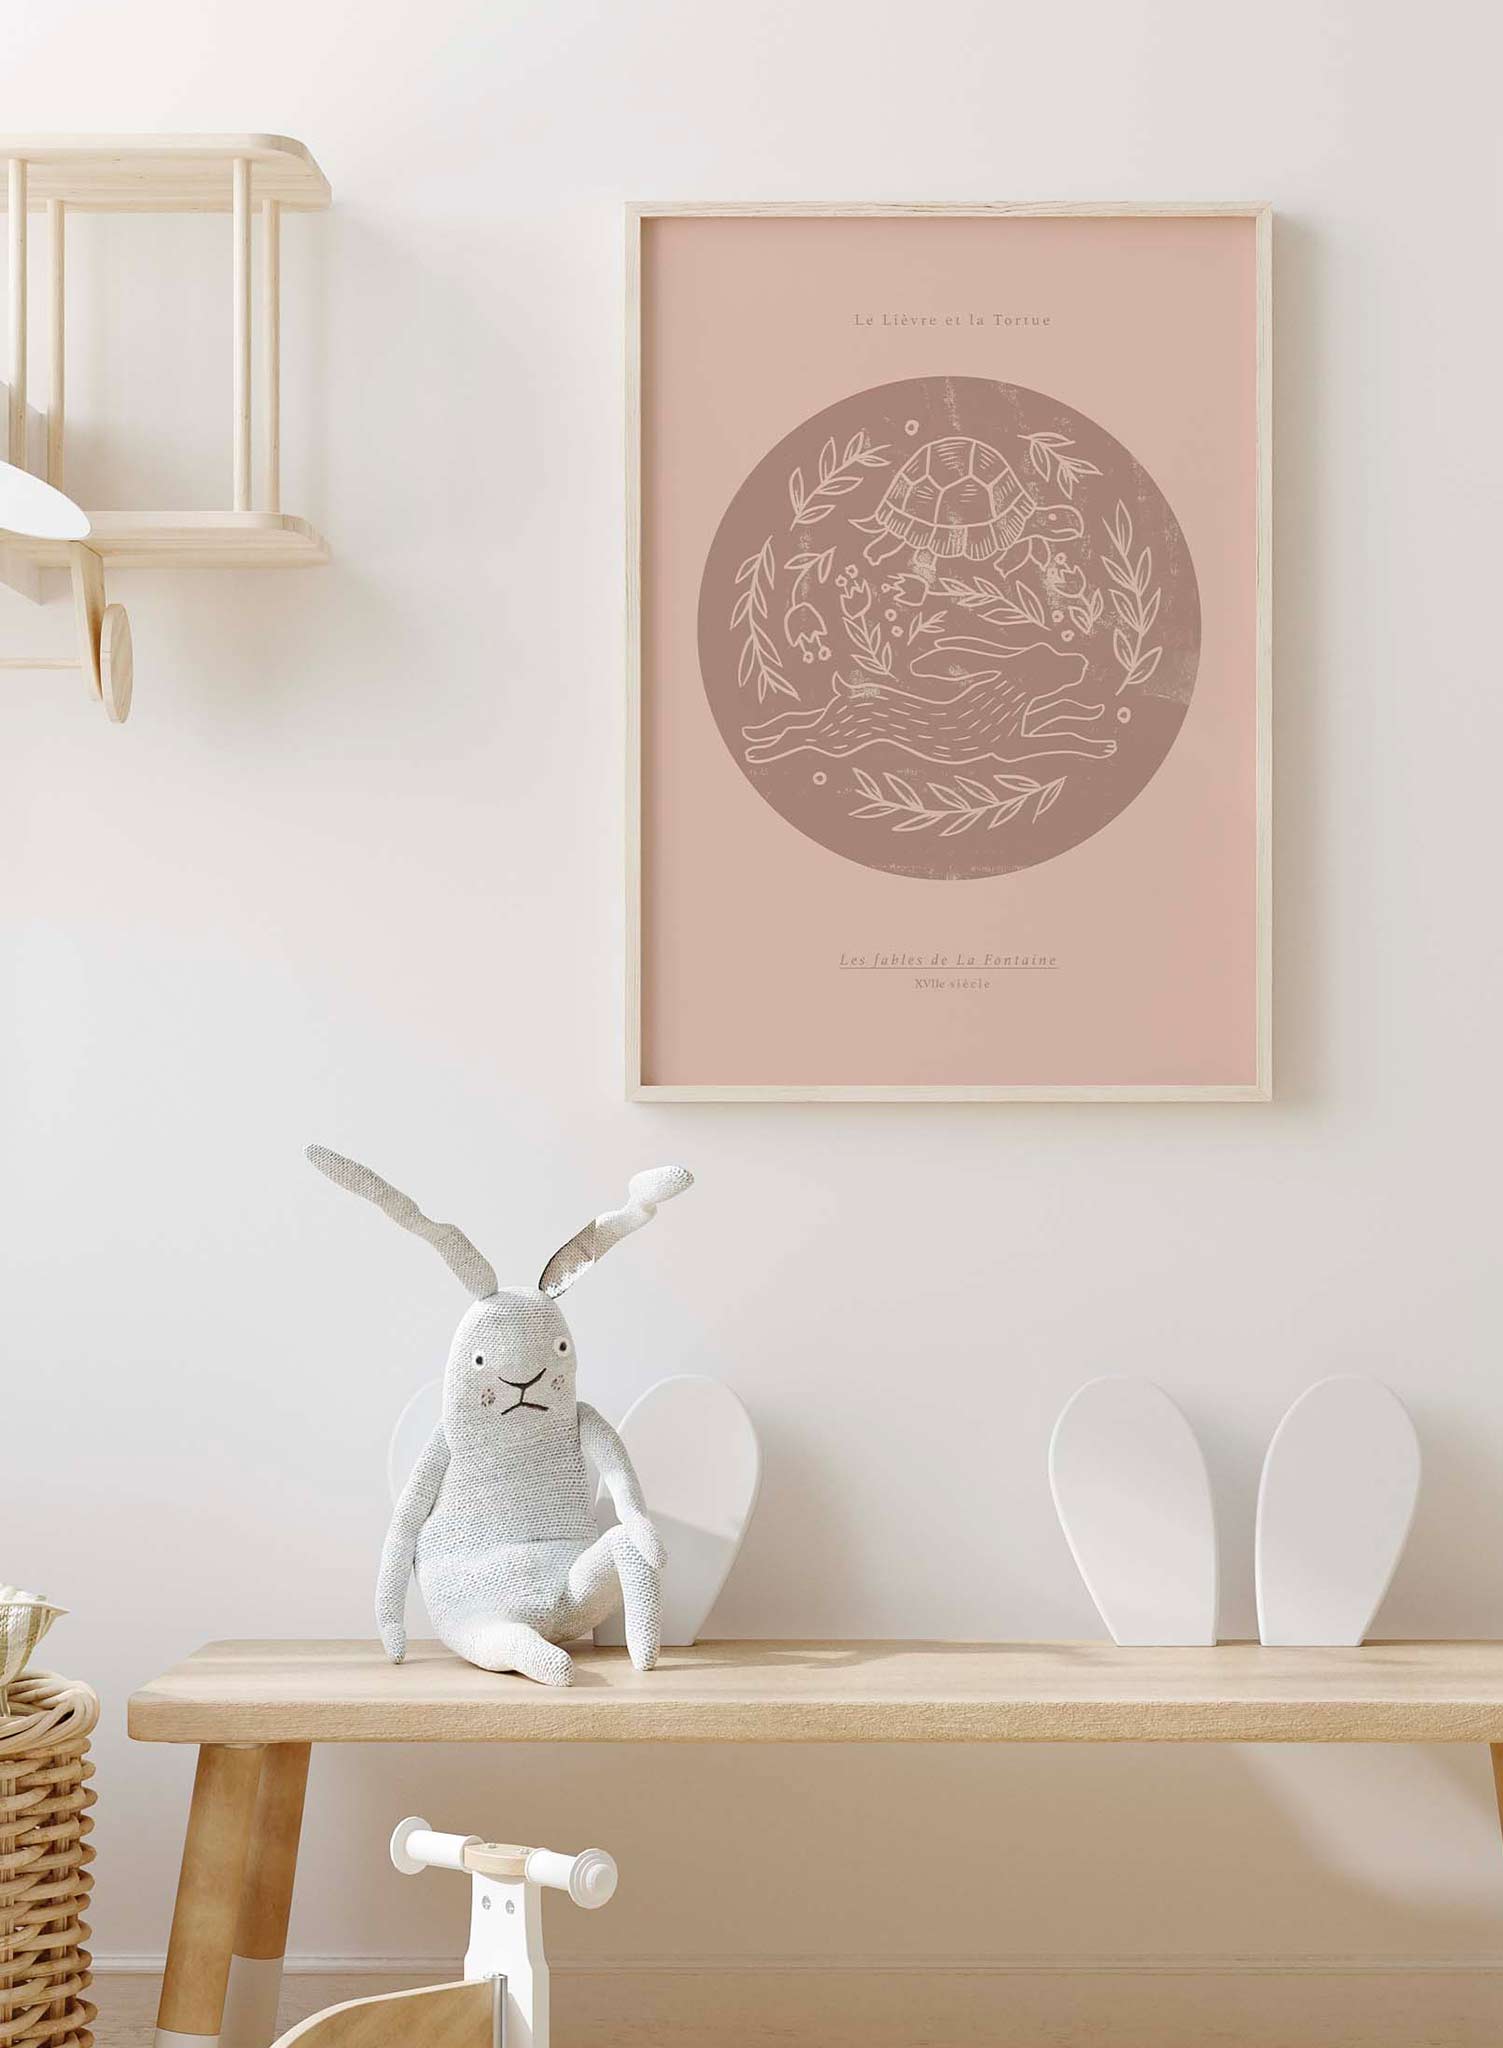 The Hare & the Tortoise is a minimalist illustration by Opposite Wall of La Fontaine's The Hare & the Tortoise where both animals are racing against each other.